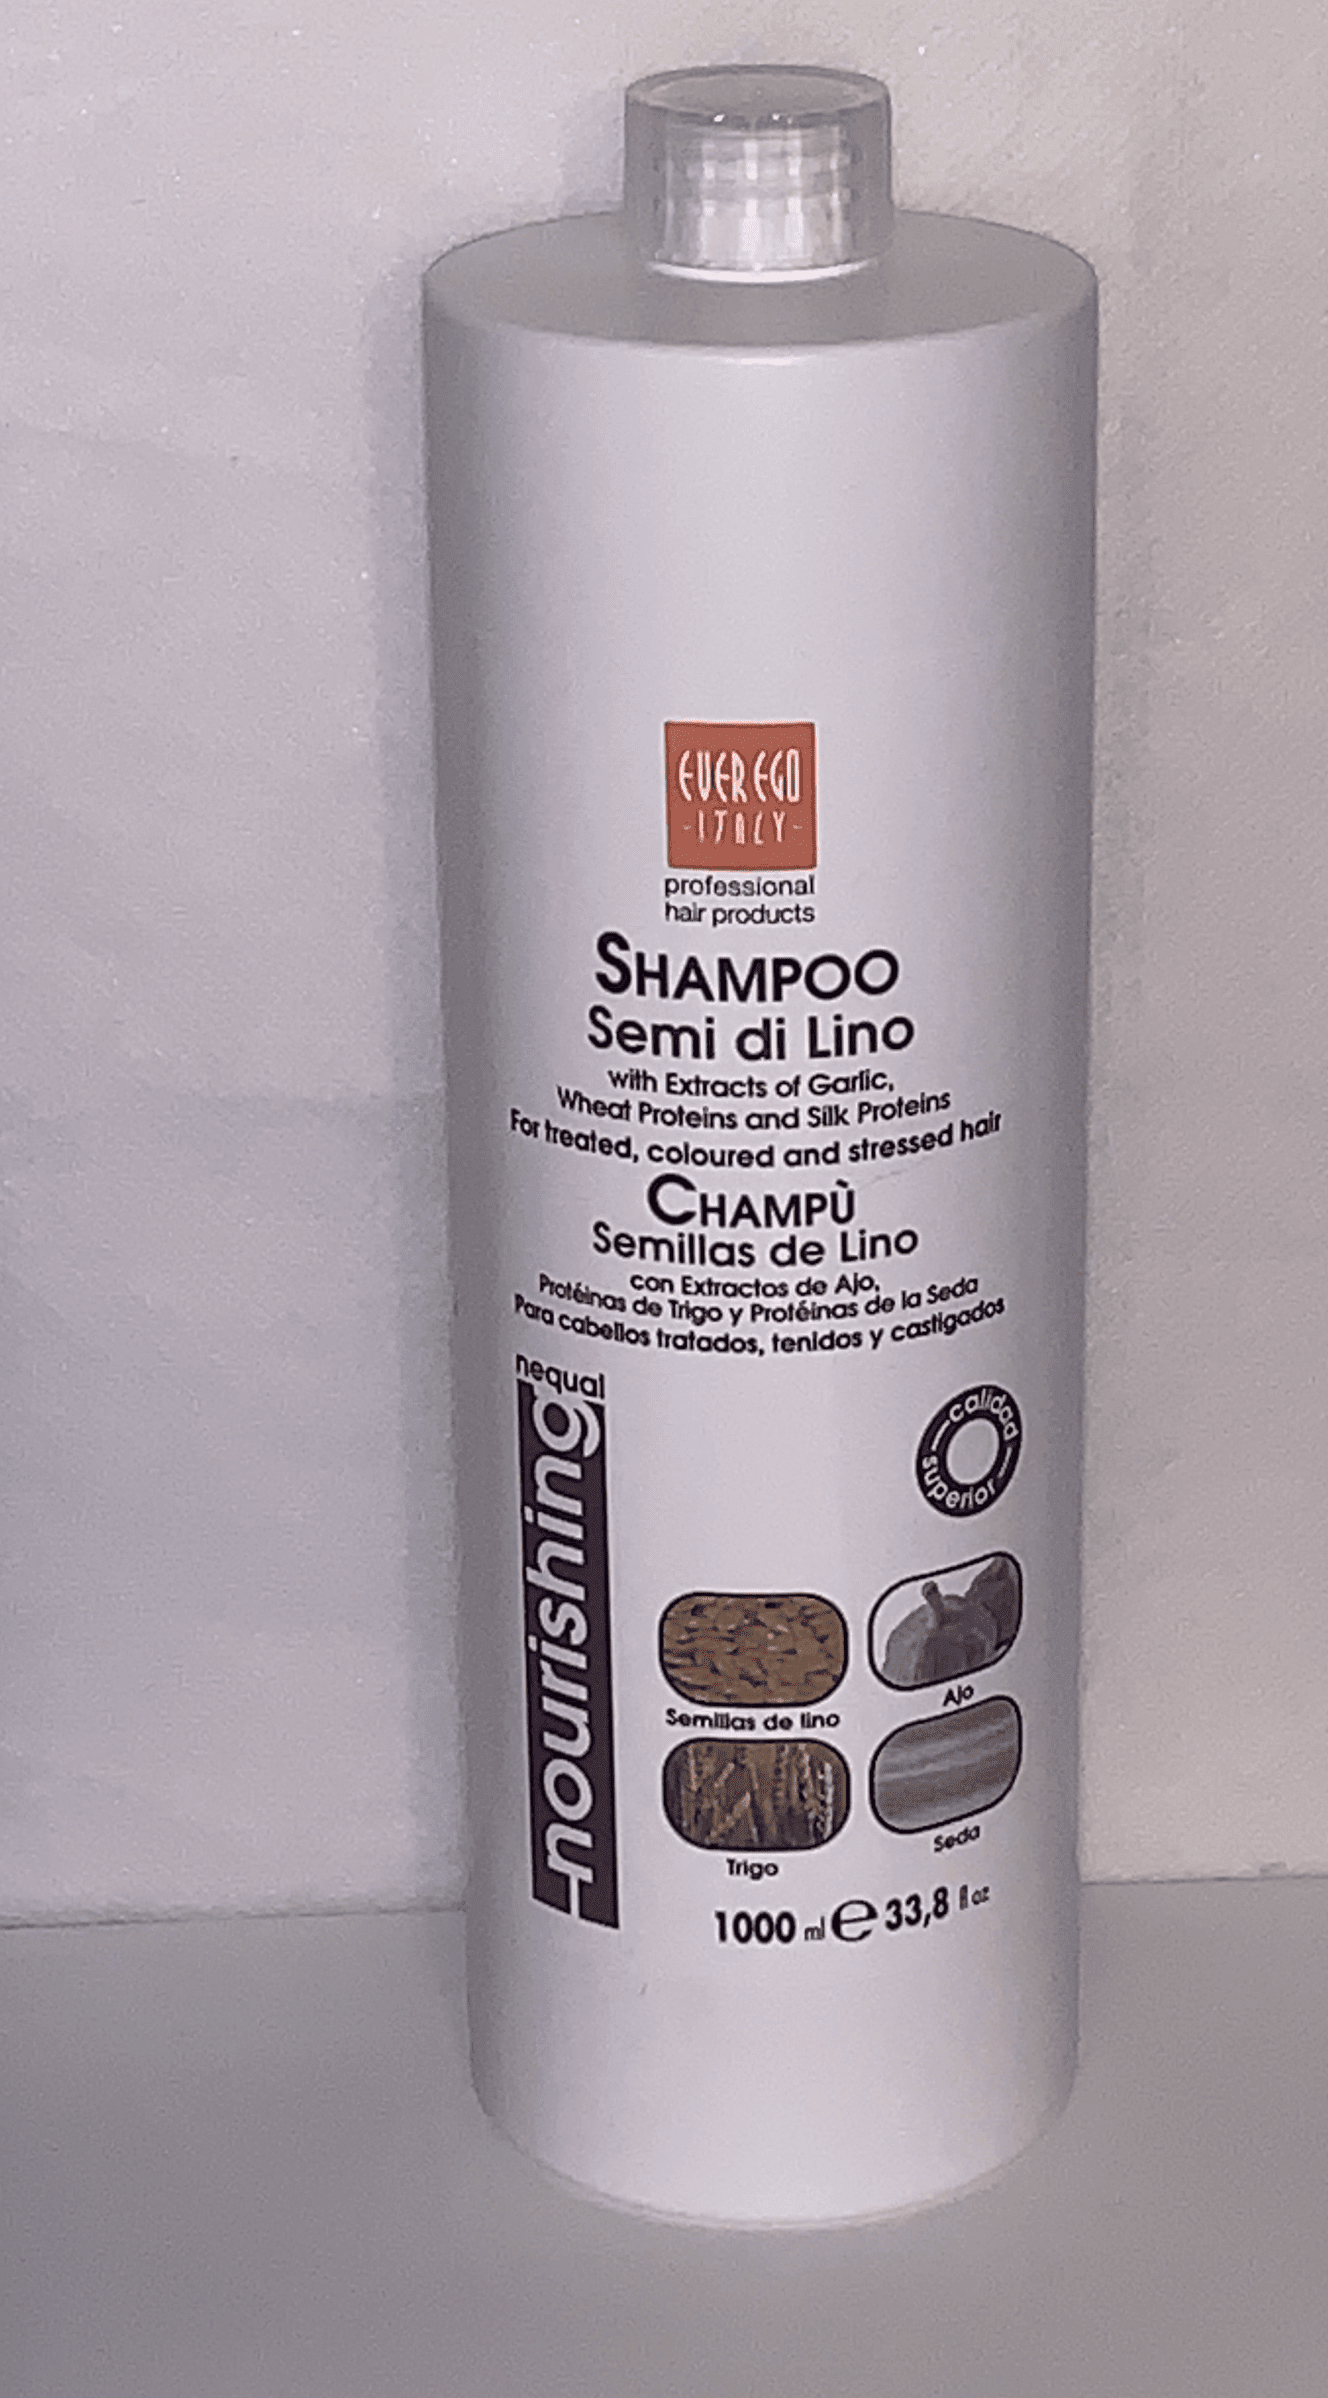 Ever Ego Alter Ego Shampoo Semi De Lino With Extracts Of Garlic Wheat Proteins And Silk